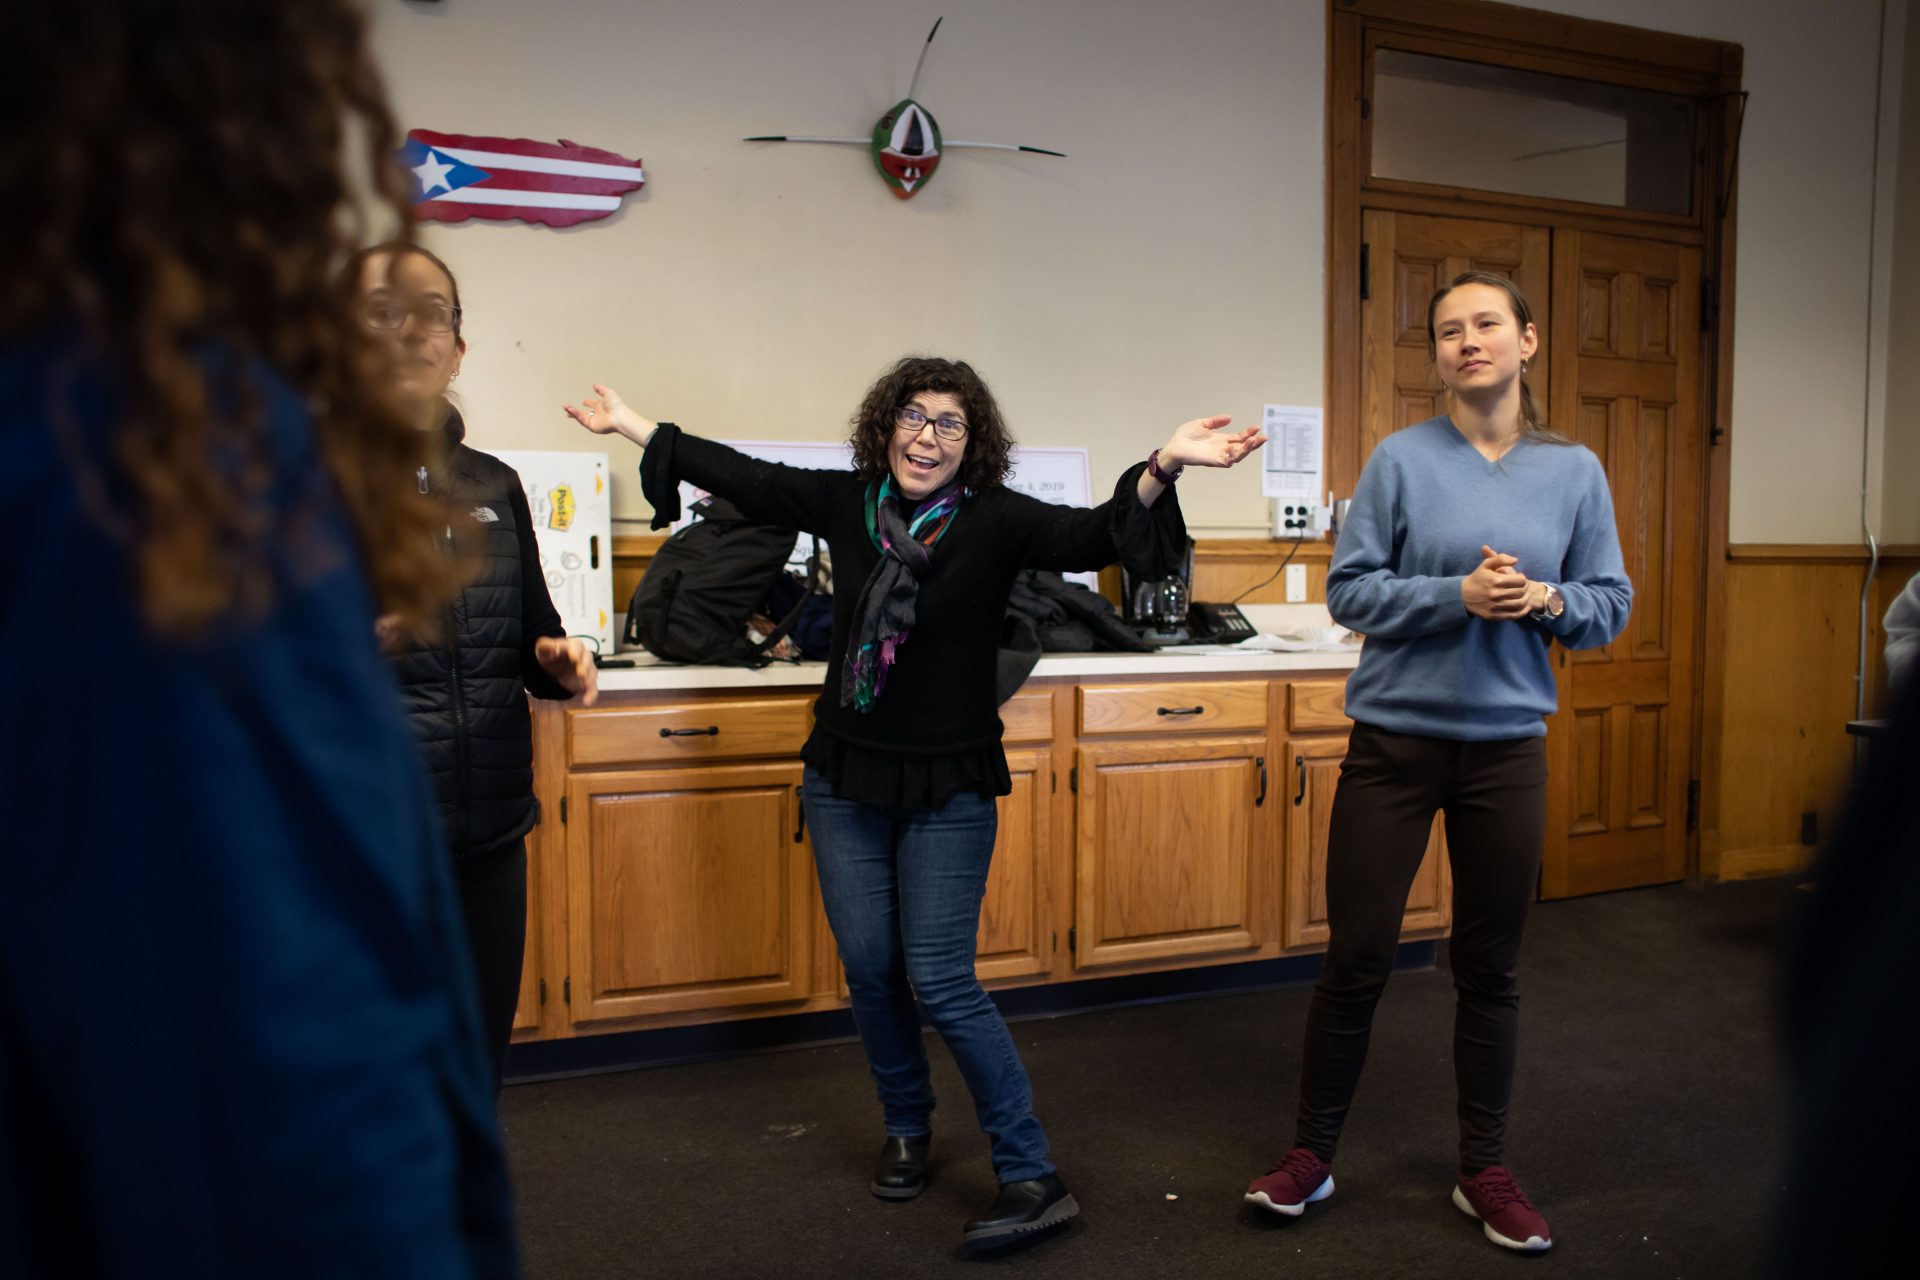 Lisa Jo Epstein (center), Artistic and Executive Director of Just Act, leads rehearsal for the play "Count Me In," a forum theater project meant to encourage participation in the 2020 census among immigrant communities.